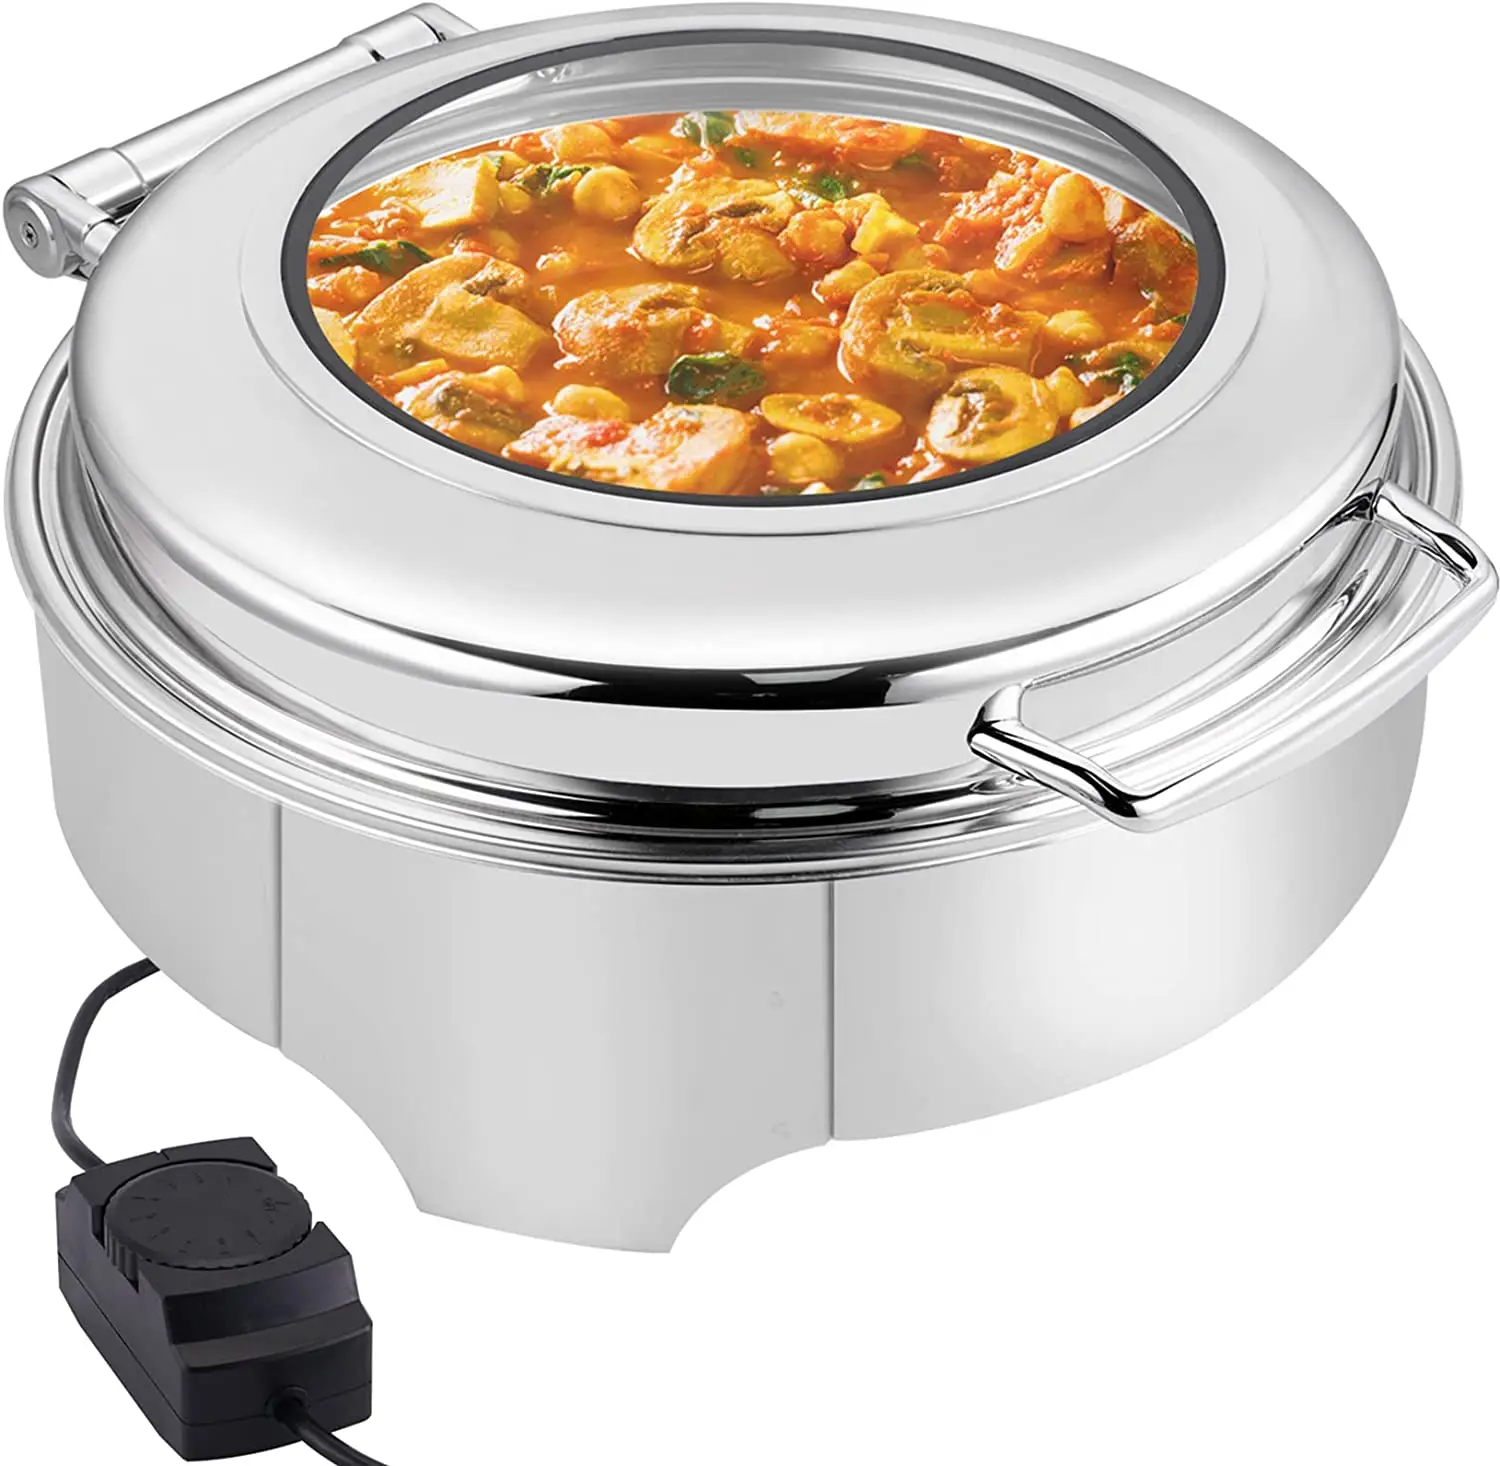 https://ae01.alicdn.com/kf/S344ce1c8d3e34cb194efaabdcc098503A/Electric-Round-Chafing-Dish-Buffet-Set-Chaffing-Servers-With-Glass-Lid-Chafers-Buffet-Food-Warmer-Set.jpg